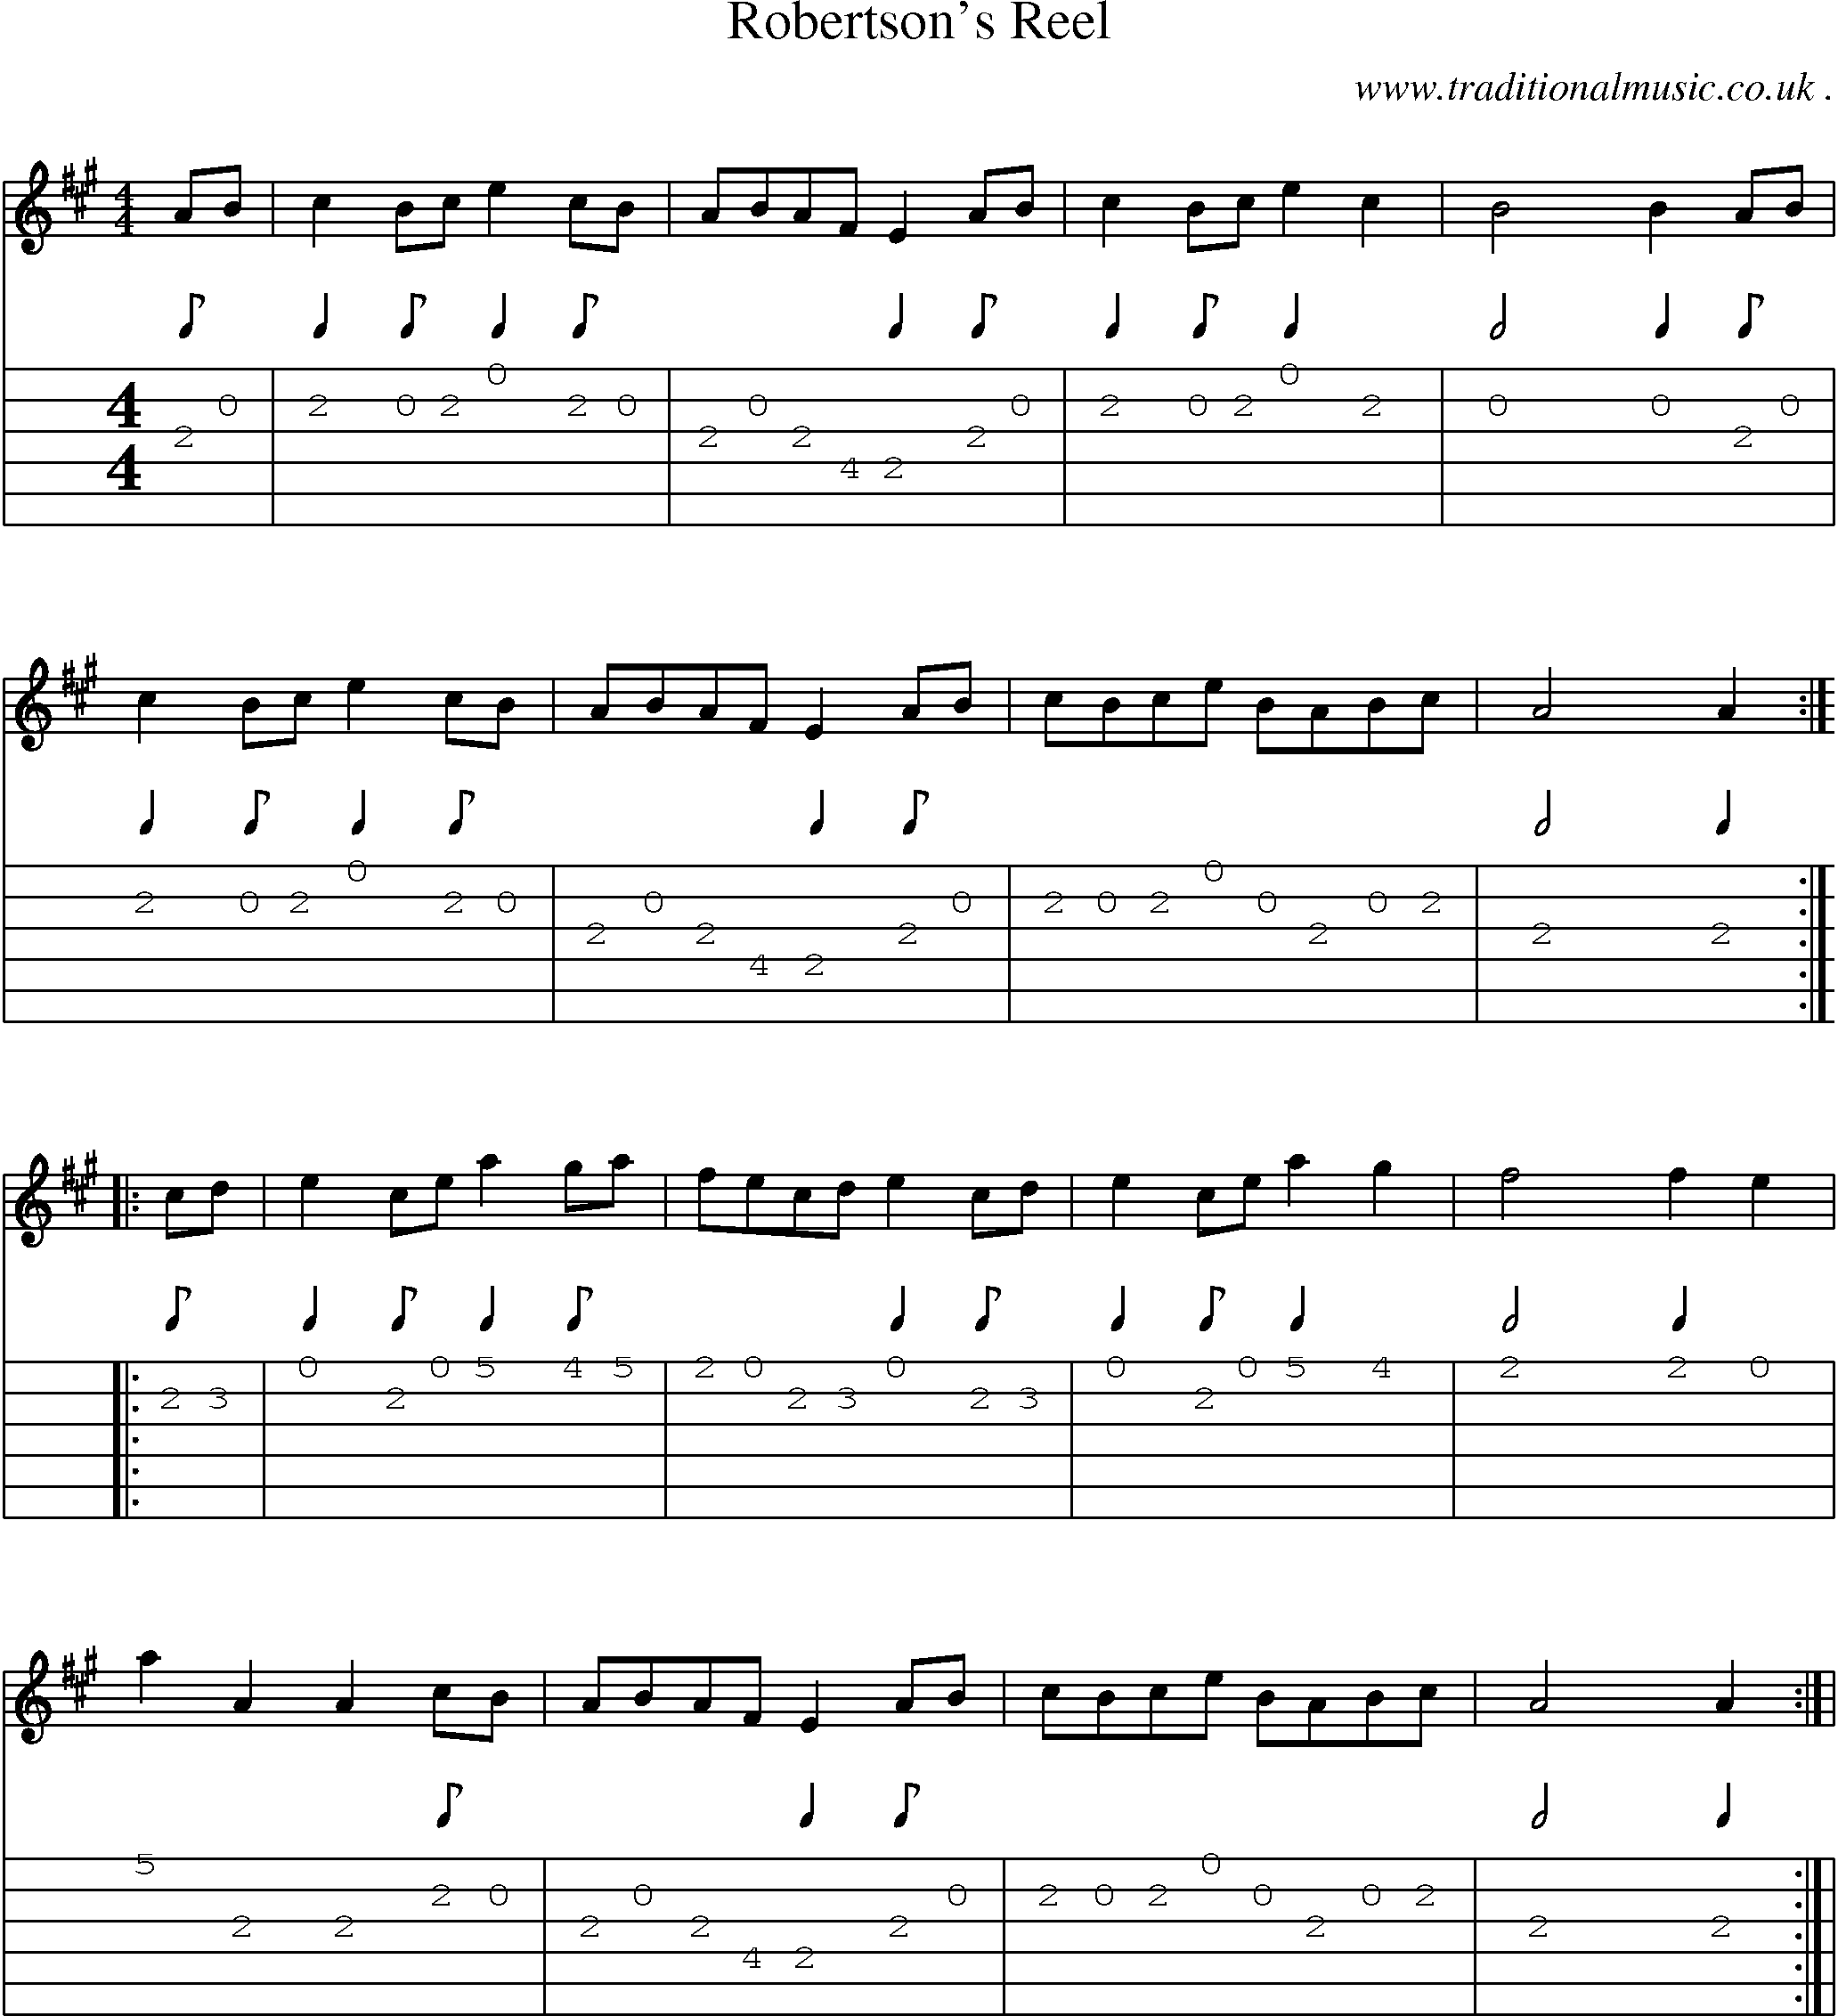 Sheet-Music and Guitar Tabs for Robertsons Reel